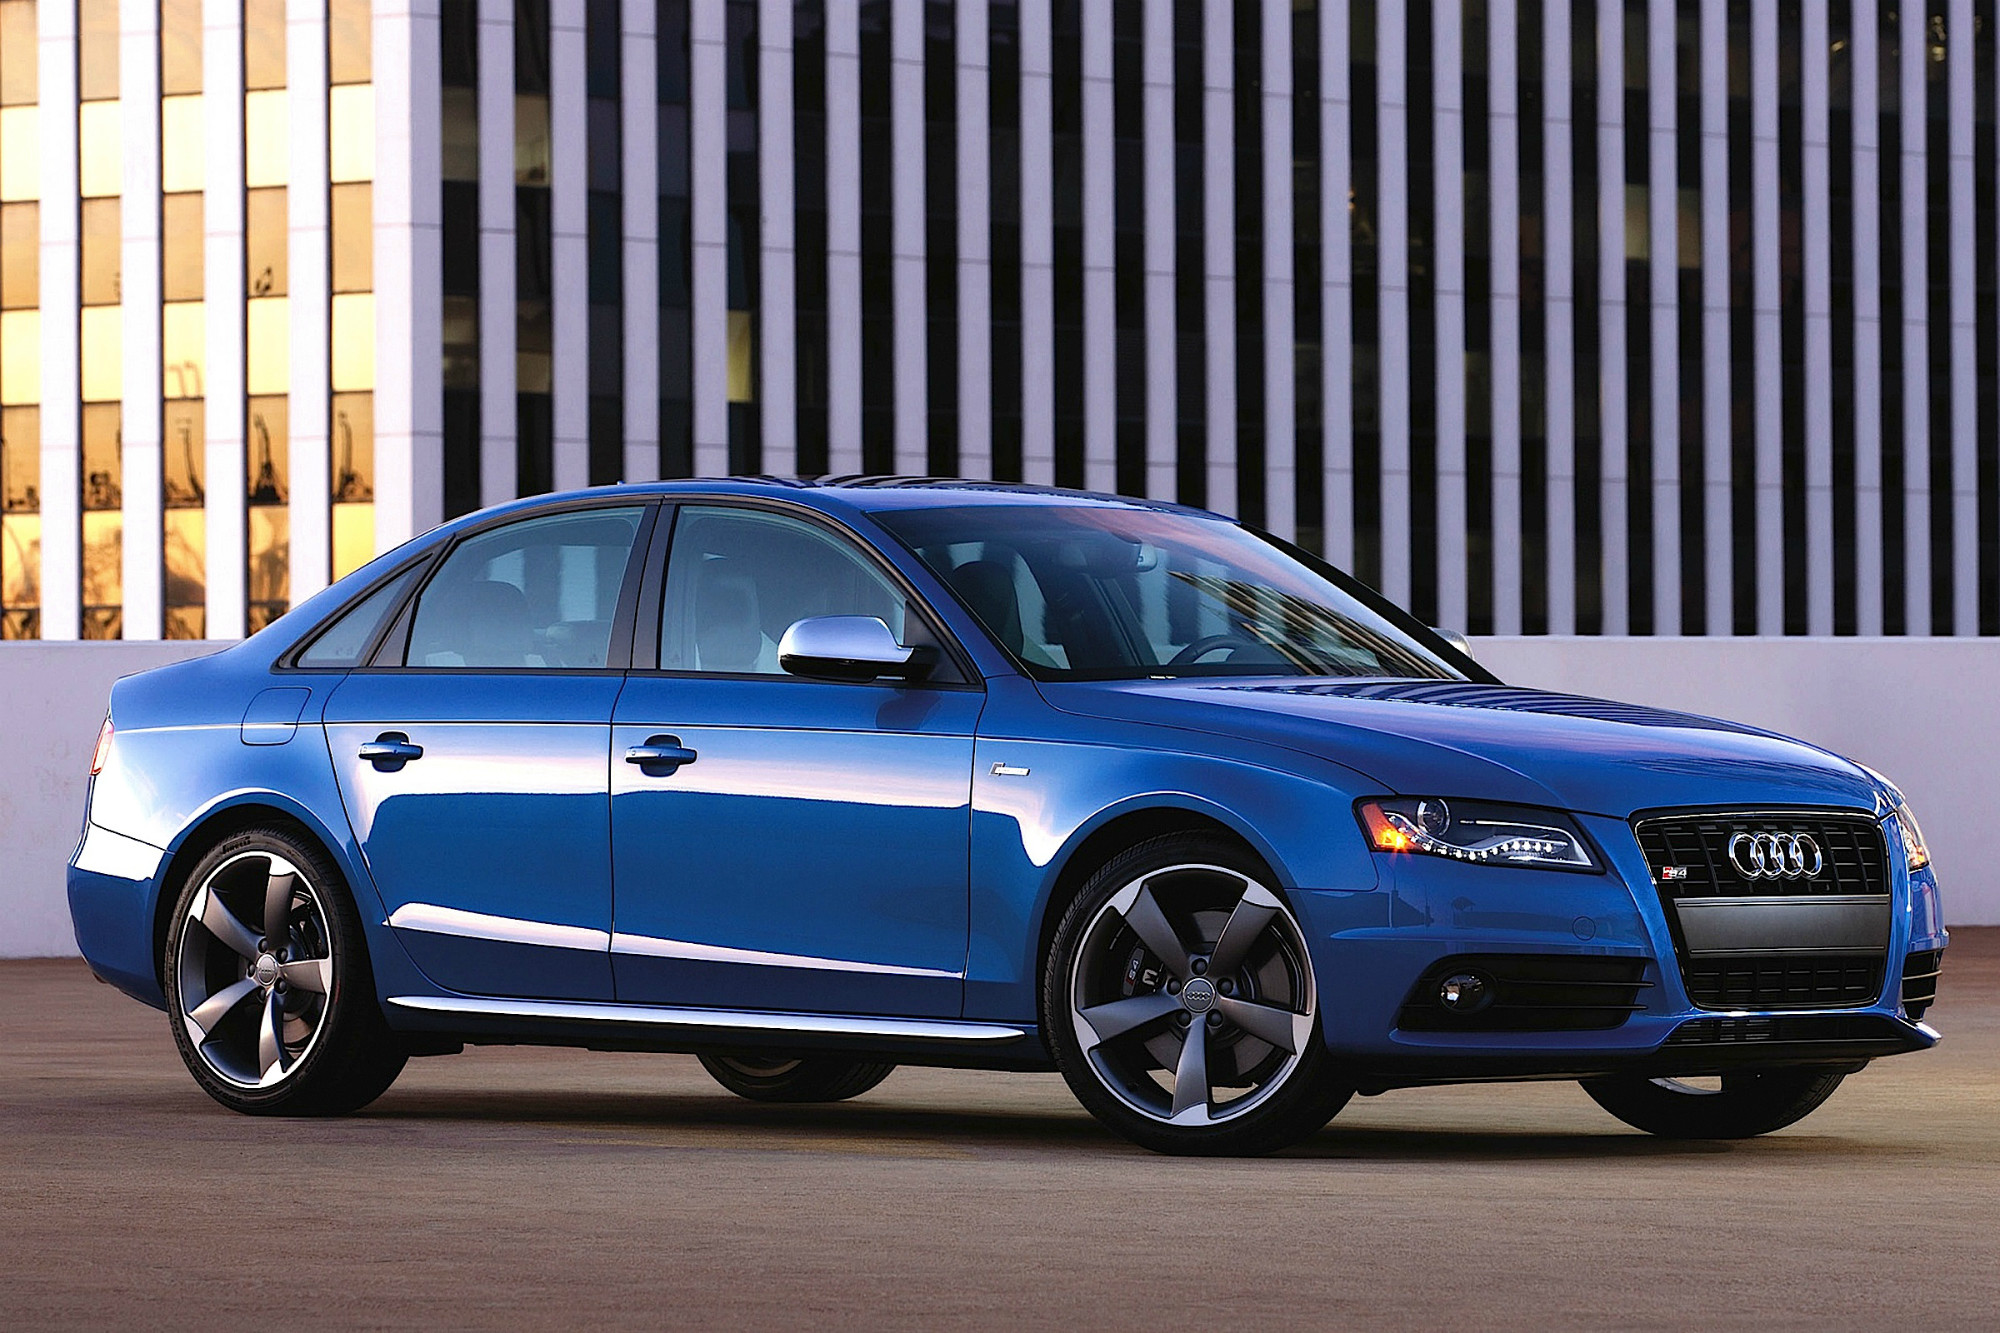 2000x1333 Audi images AUDI S4 HD wallpaper and background photos